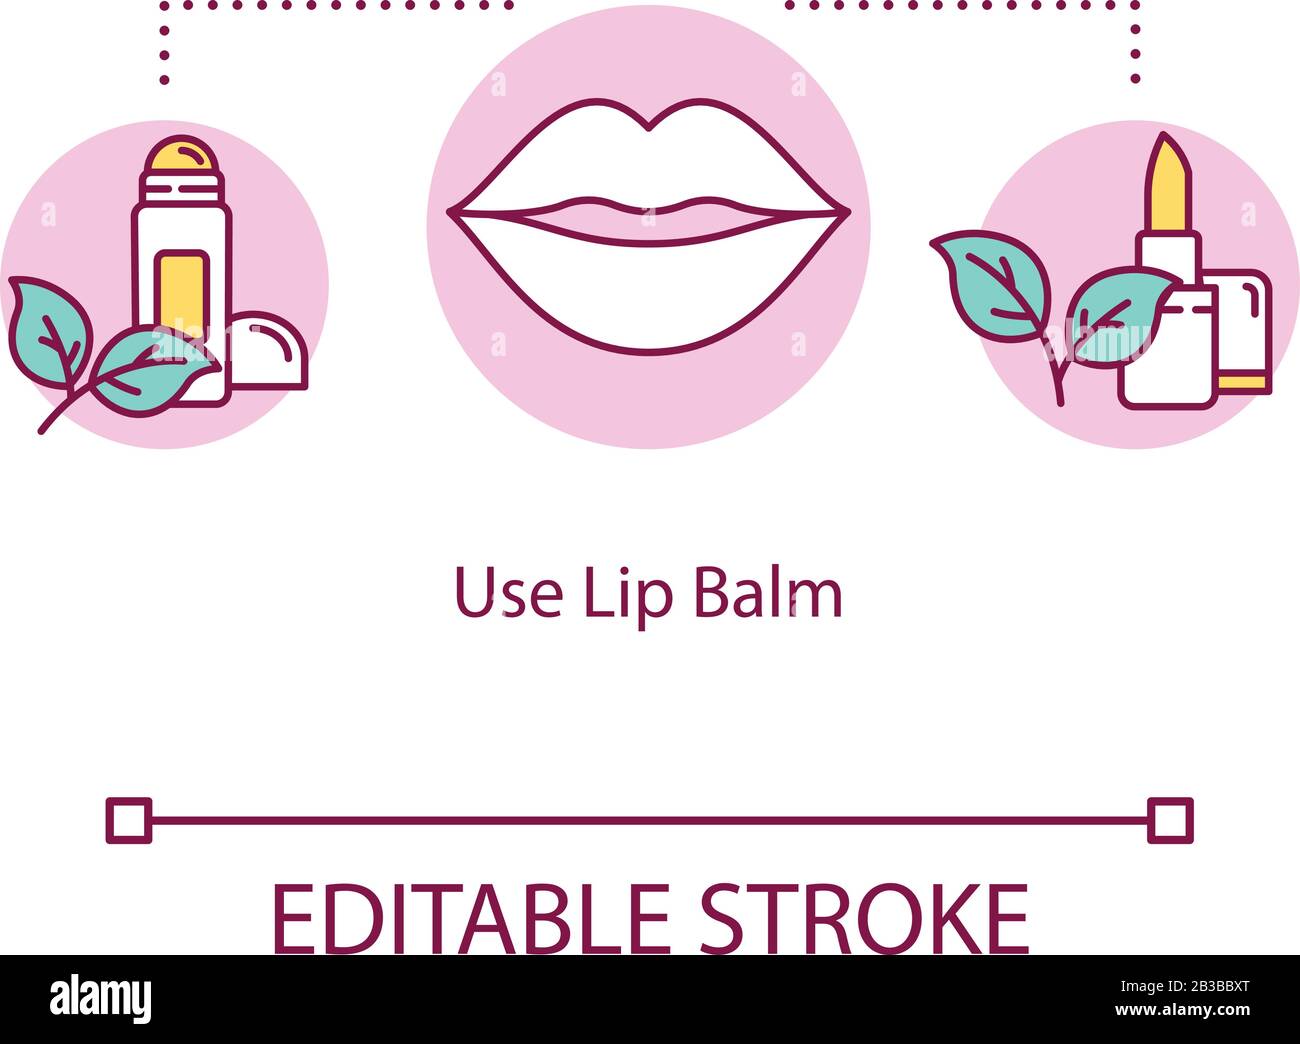 Use lip balm concept icon. Skincare and beauty. Hygienic lipbalm. Cosmetic and dermatology. Lipcare idea thin line illustration. Vector isolated Stock Vector